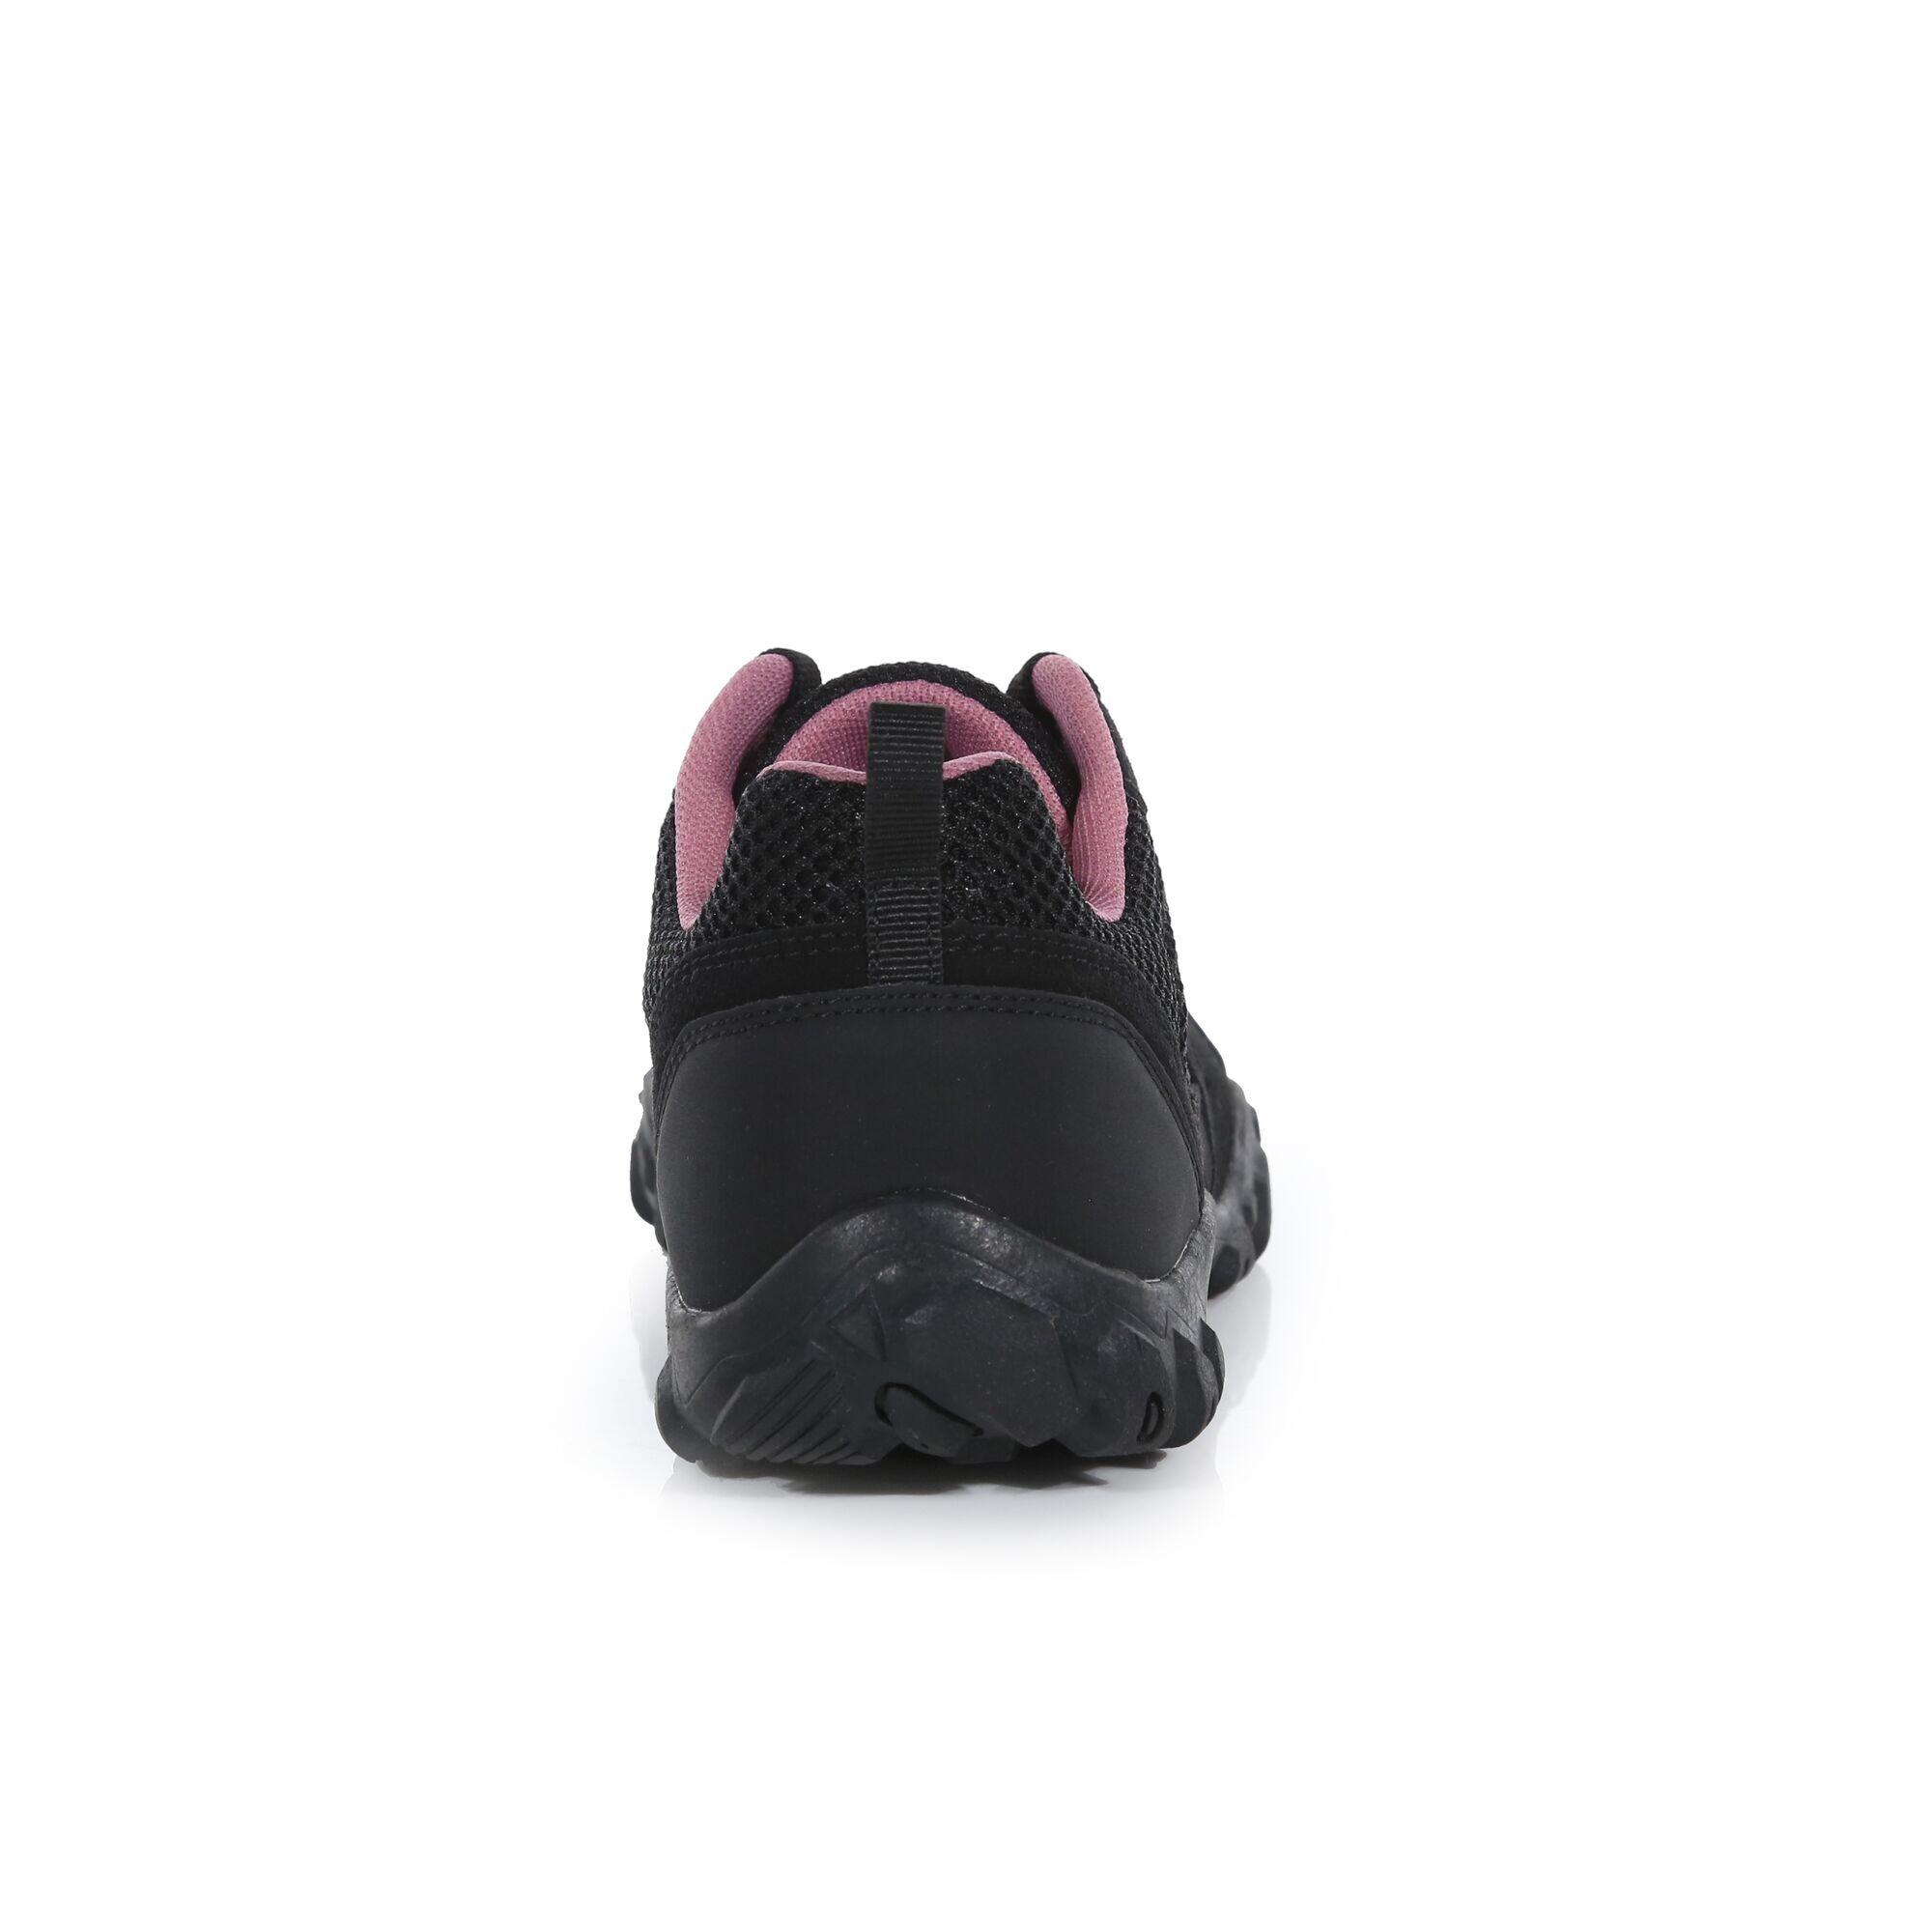 Lady Edgepoint Life Women's Walking Trainers - Black / Pink 3/6